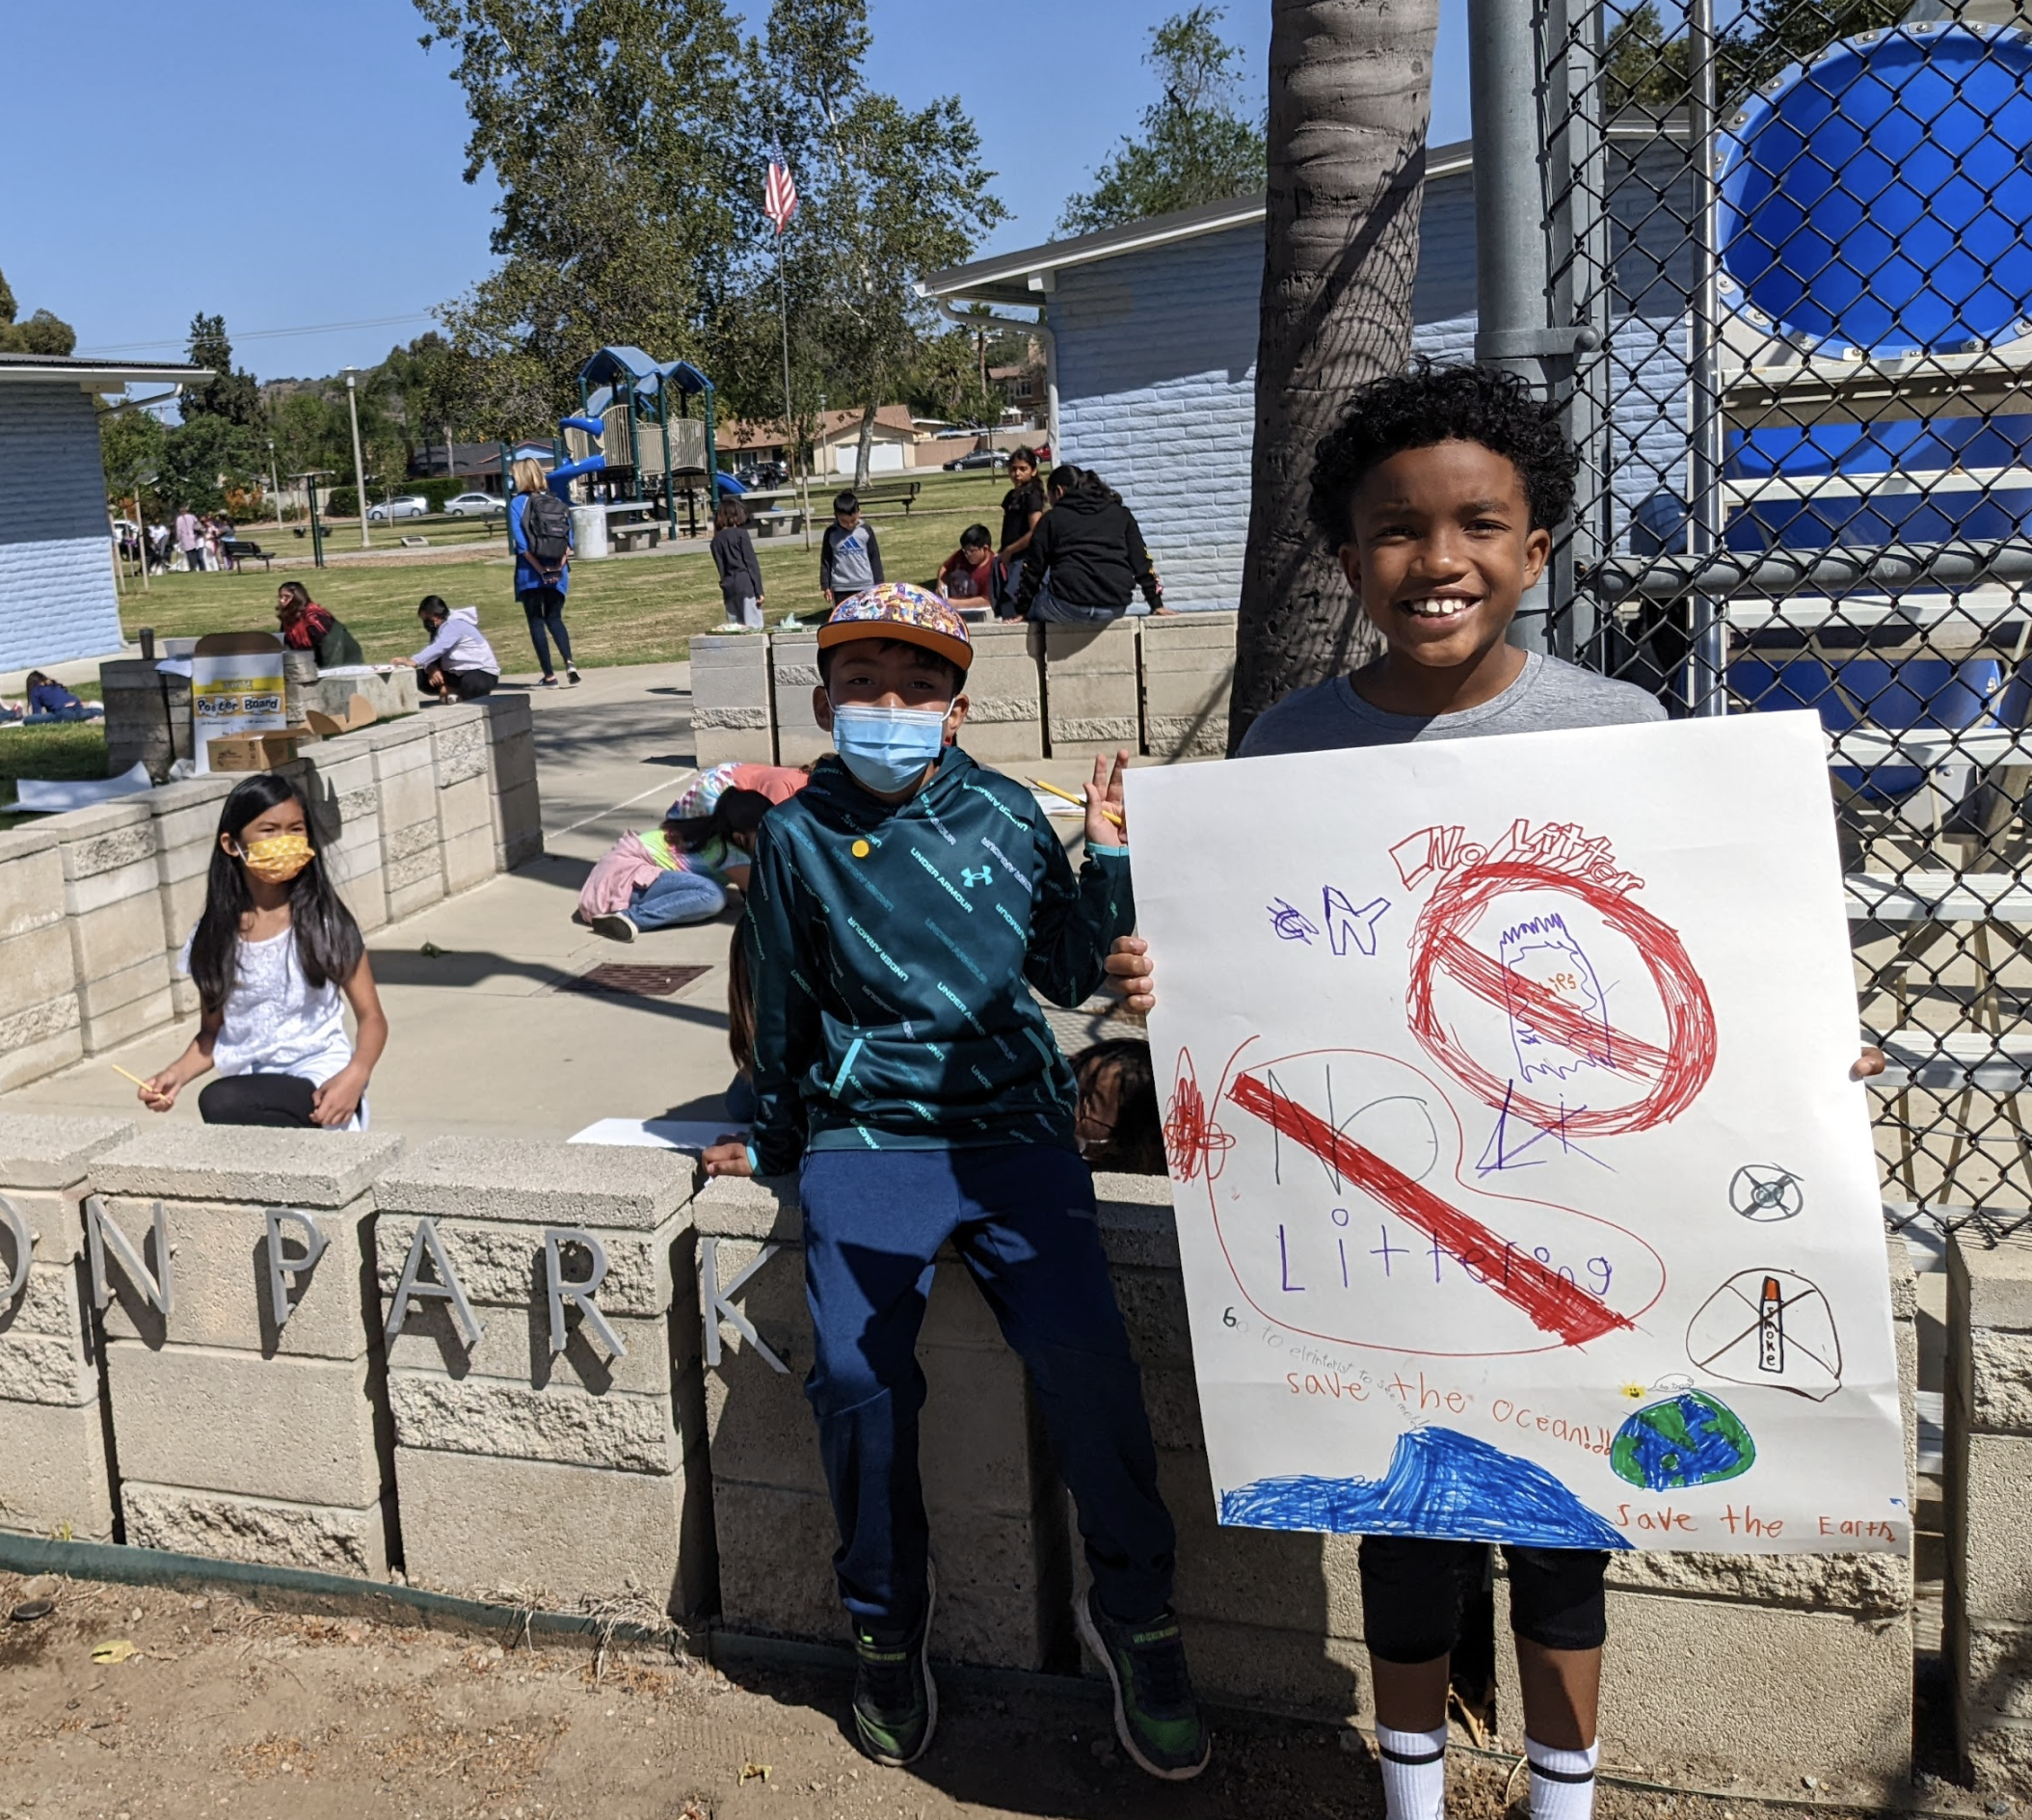 Students pose for the camera with their "don't litter" sign they made for Earth Day.